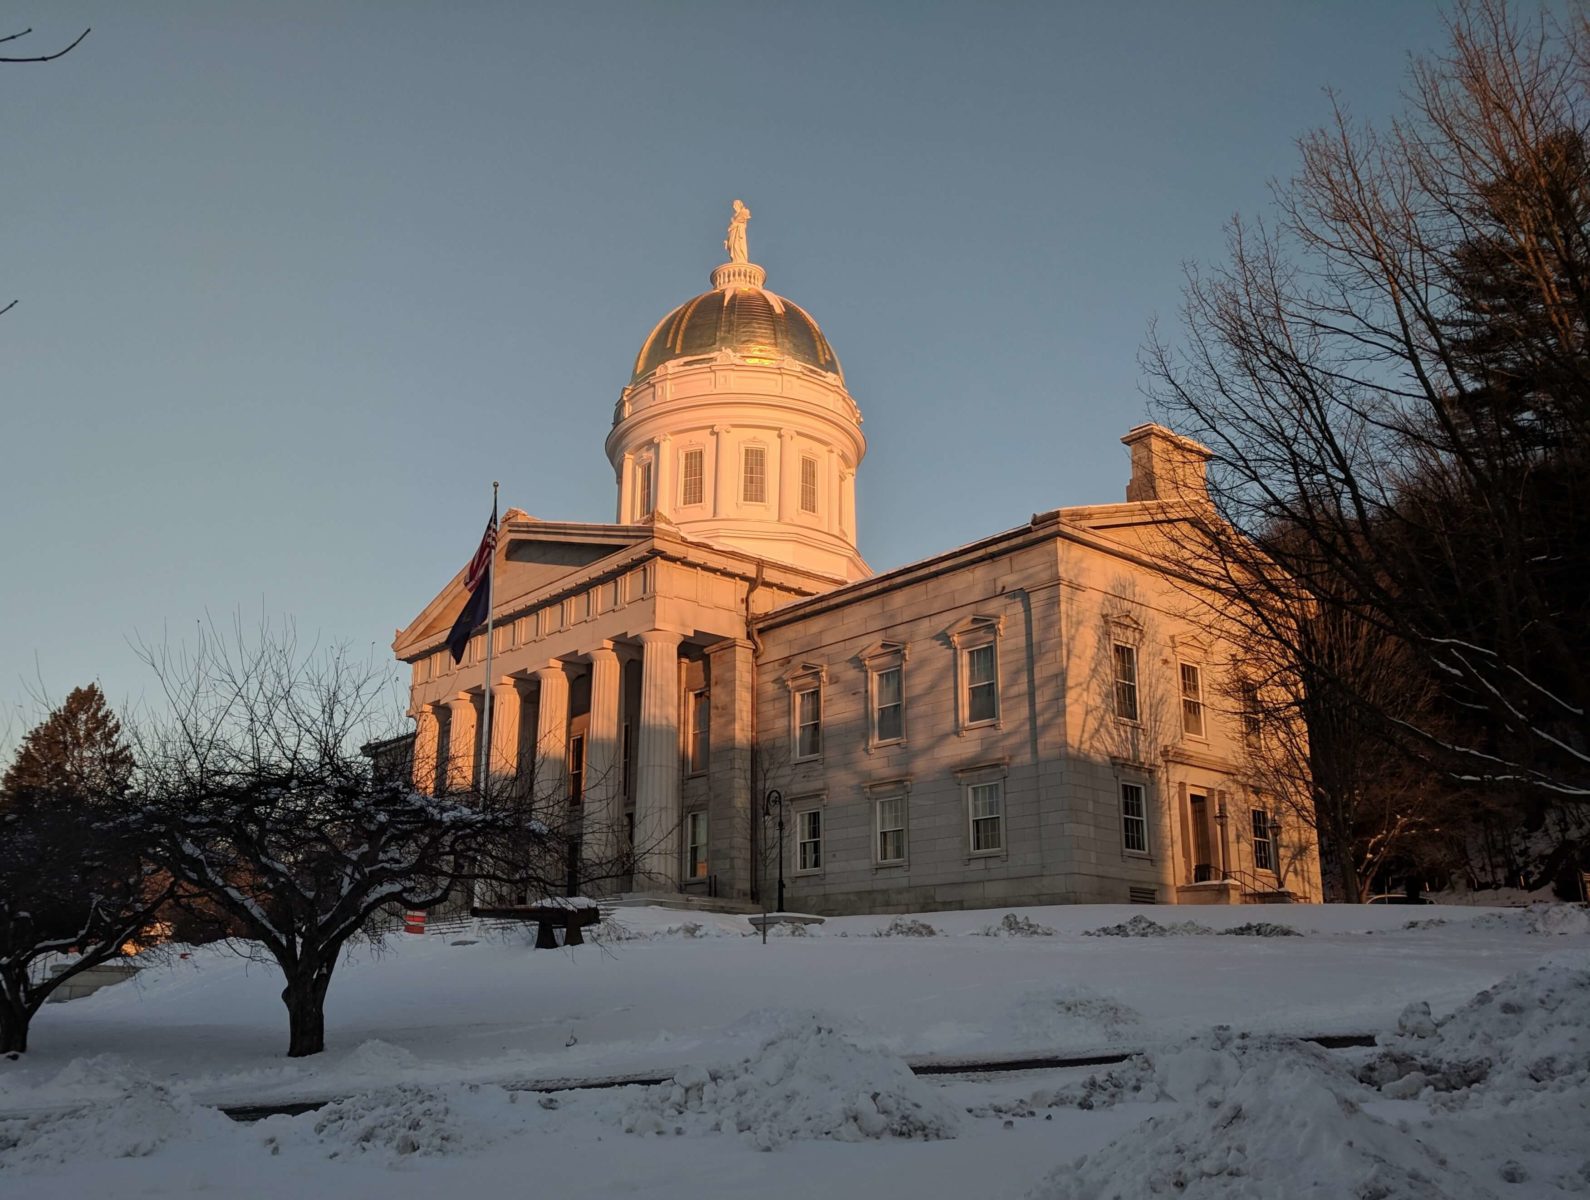 granite building with columns and dome at dawn